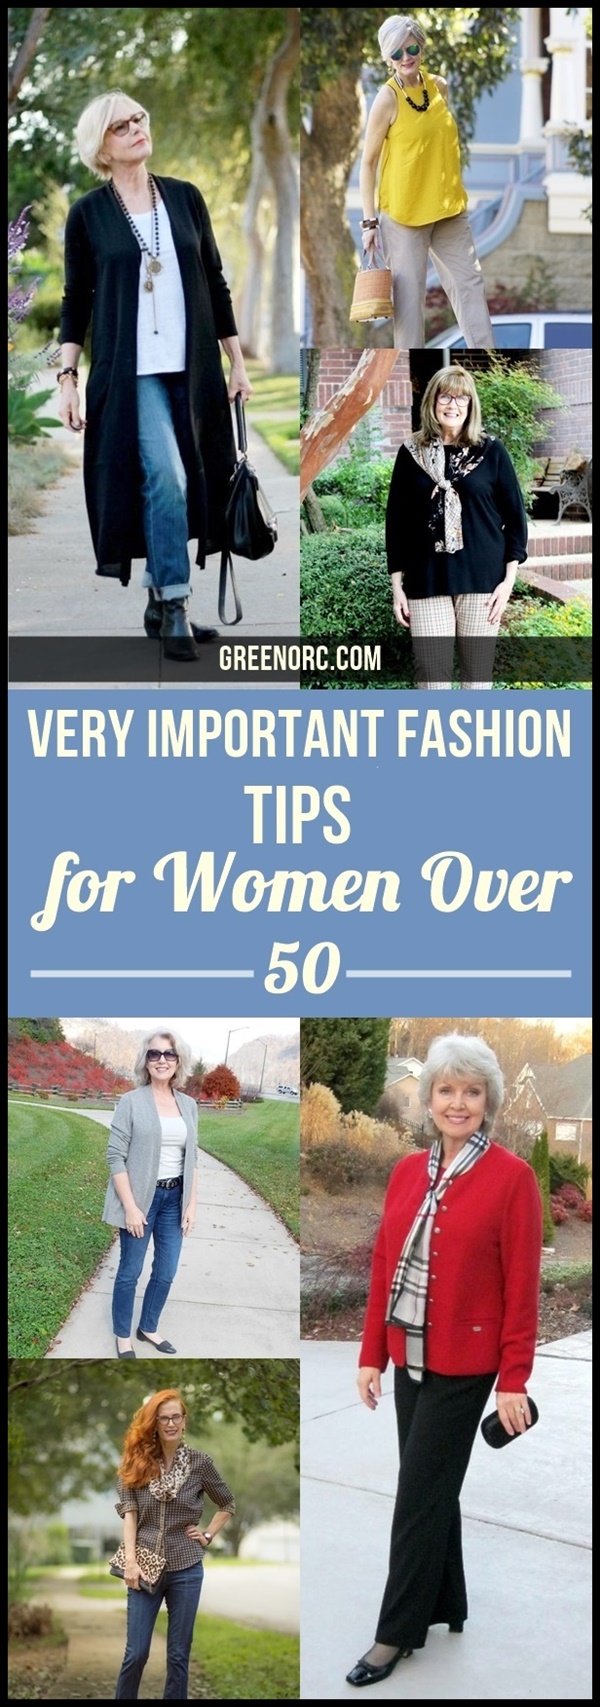 15 Very Important Fashion Tips for Women Over 50 - Greenorc